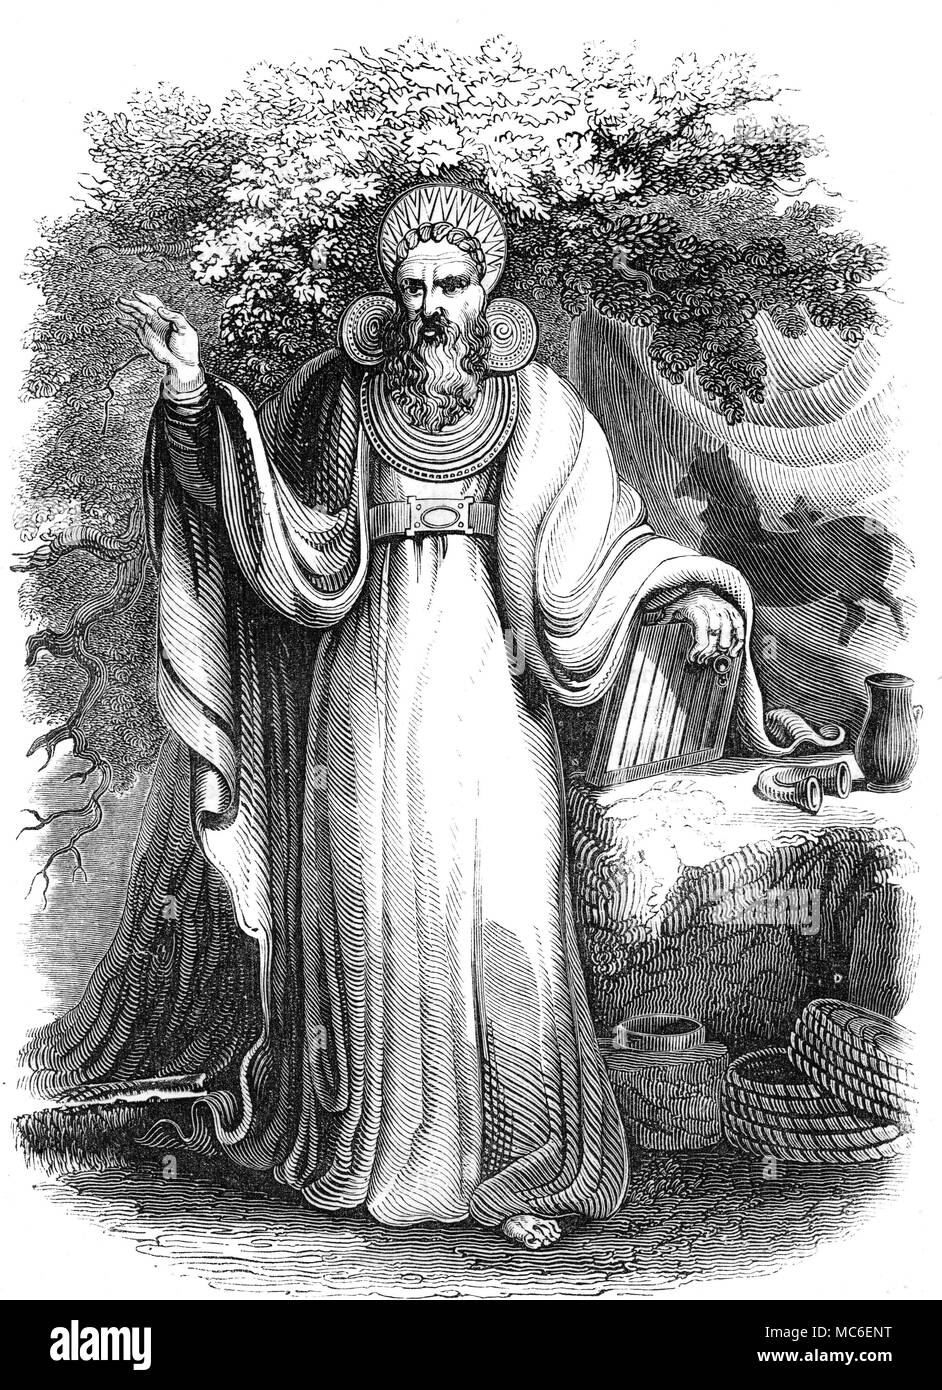 DRUIDS Druid arch-priest - engraving from The Museum of Animated-Nature, 1873. Stock Photo